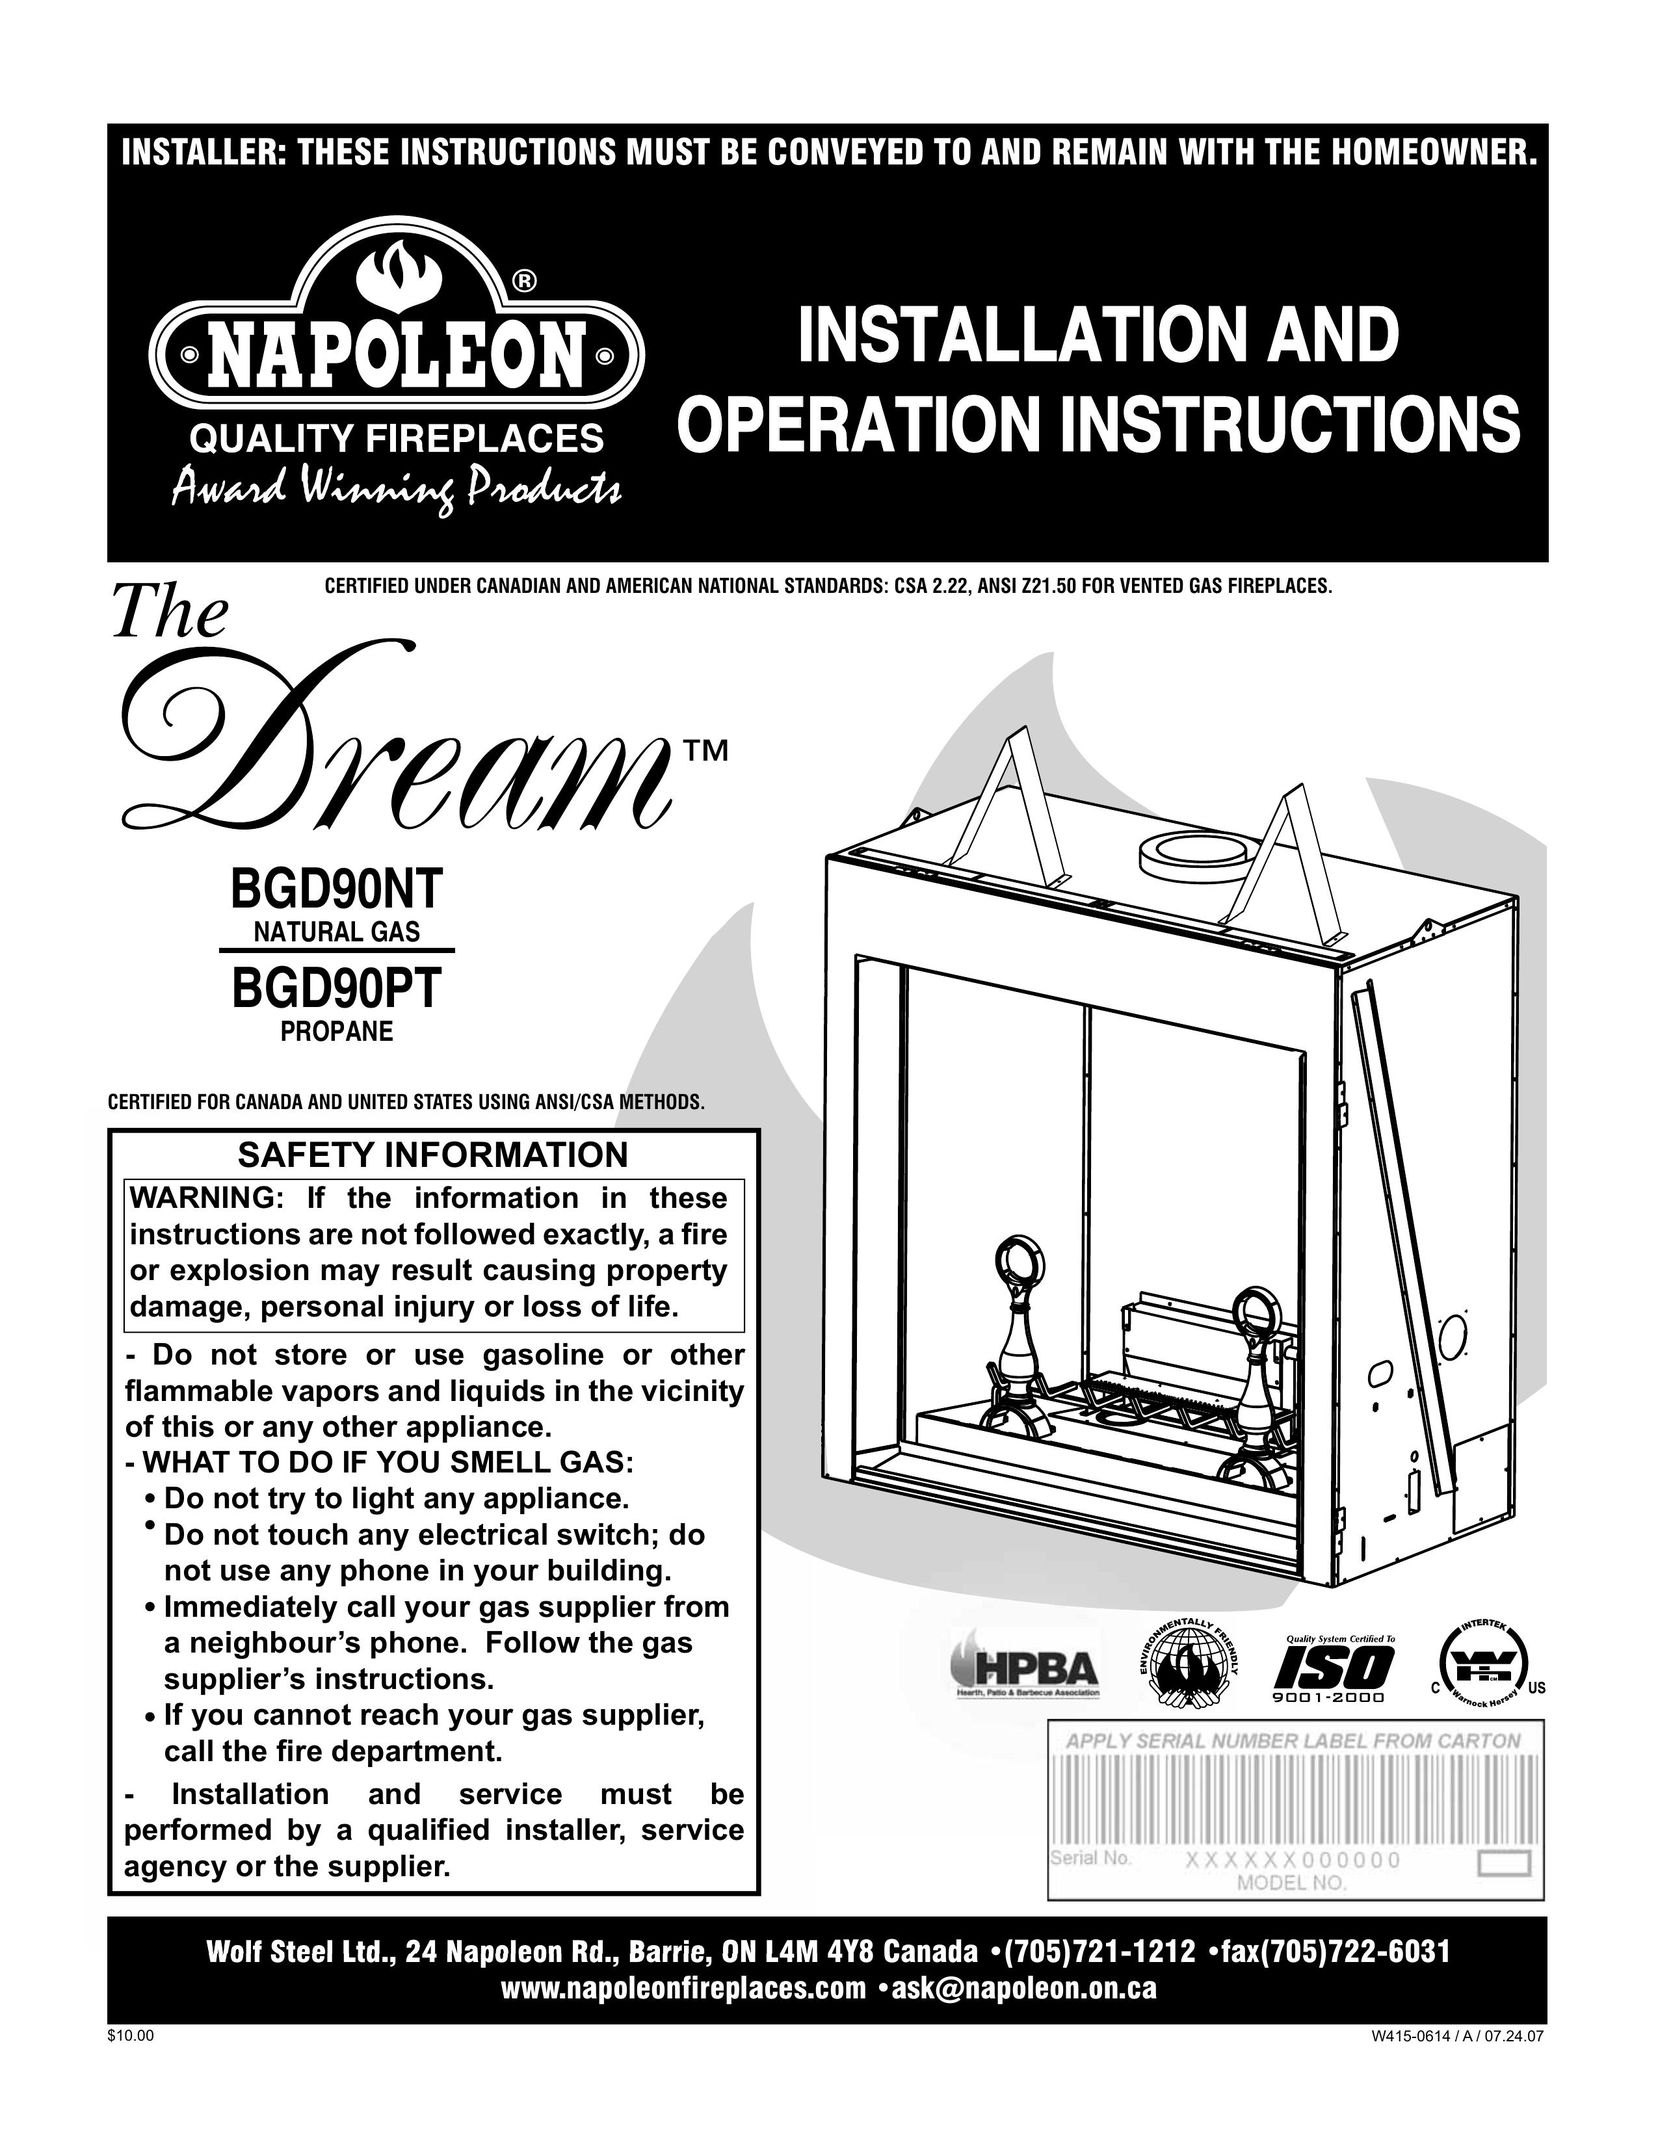 Napoleon Fireplaces BGD90NT Indoor Fireplace User Manual